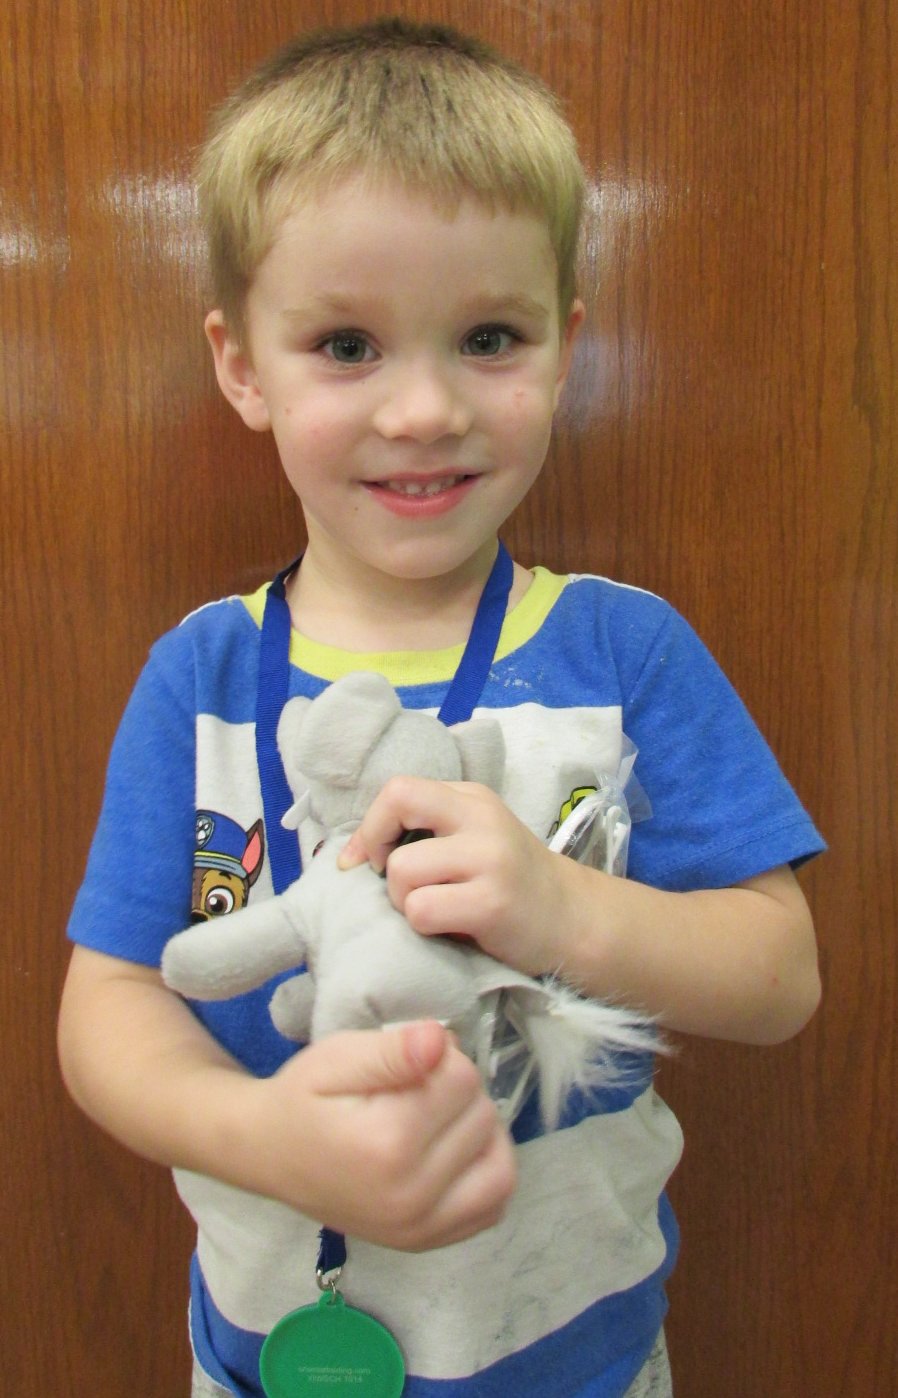 RIGHT: Luke Bell, 4, has completed the Crawfordsville District Public Library program 1,000 Books Before Kindergarten. He is the son of Carissa Bell. Luke’s favorite book is “Go, Dog.Go! “ by P.D. Eastman. Mom said, “It is a great program to help children read.”